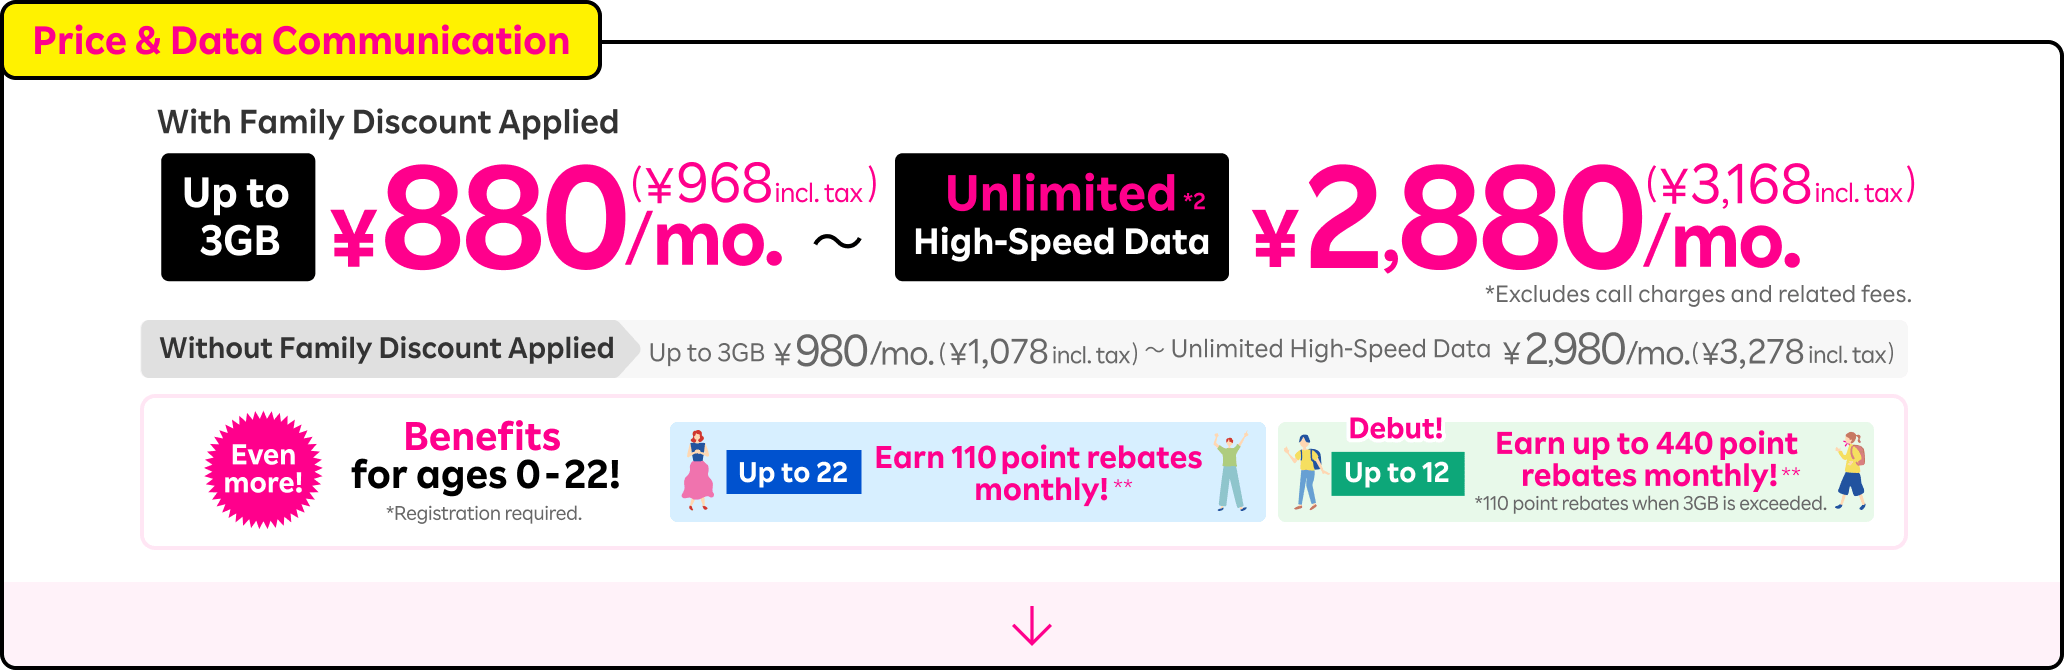 Price & Data Communication: The powerful program arrives to boost family savings! With the family discount applied, 880 yen/mo. (968 yen incl. tax) for up to 3GB or 2,880 yen/mo. (3,168 yen incl. tax) for unlimited high-speed data. Without the family discount applied, 980 yen/mo. (1,078 yen incl. tax) for up to 3GB or 2,980 yen/mo. (3,278 yen incl. tax) for unlimited high-speed data.